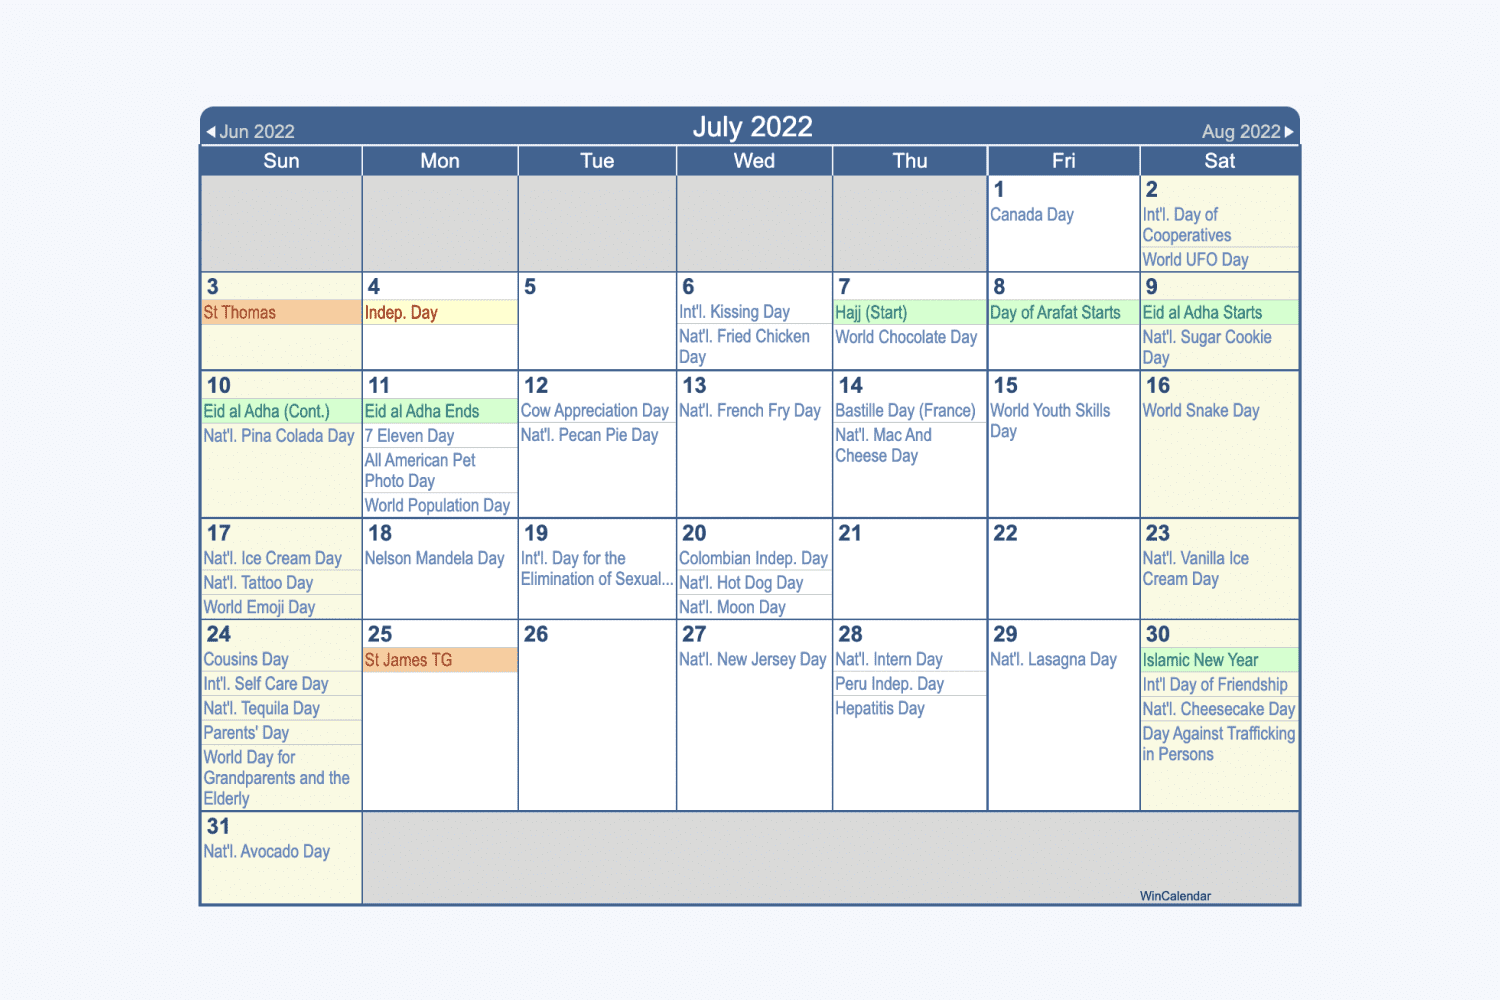 Calendar showing holidays in dates.